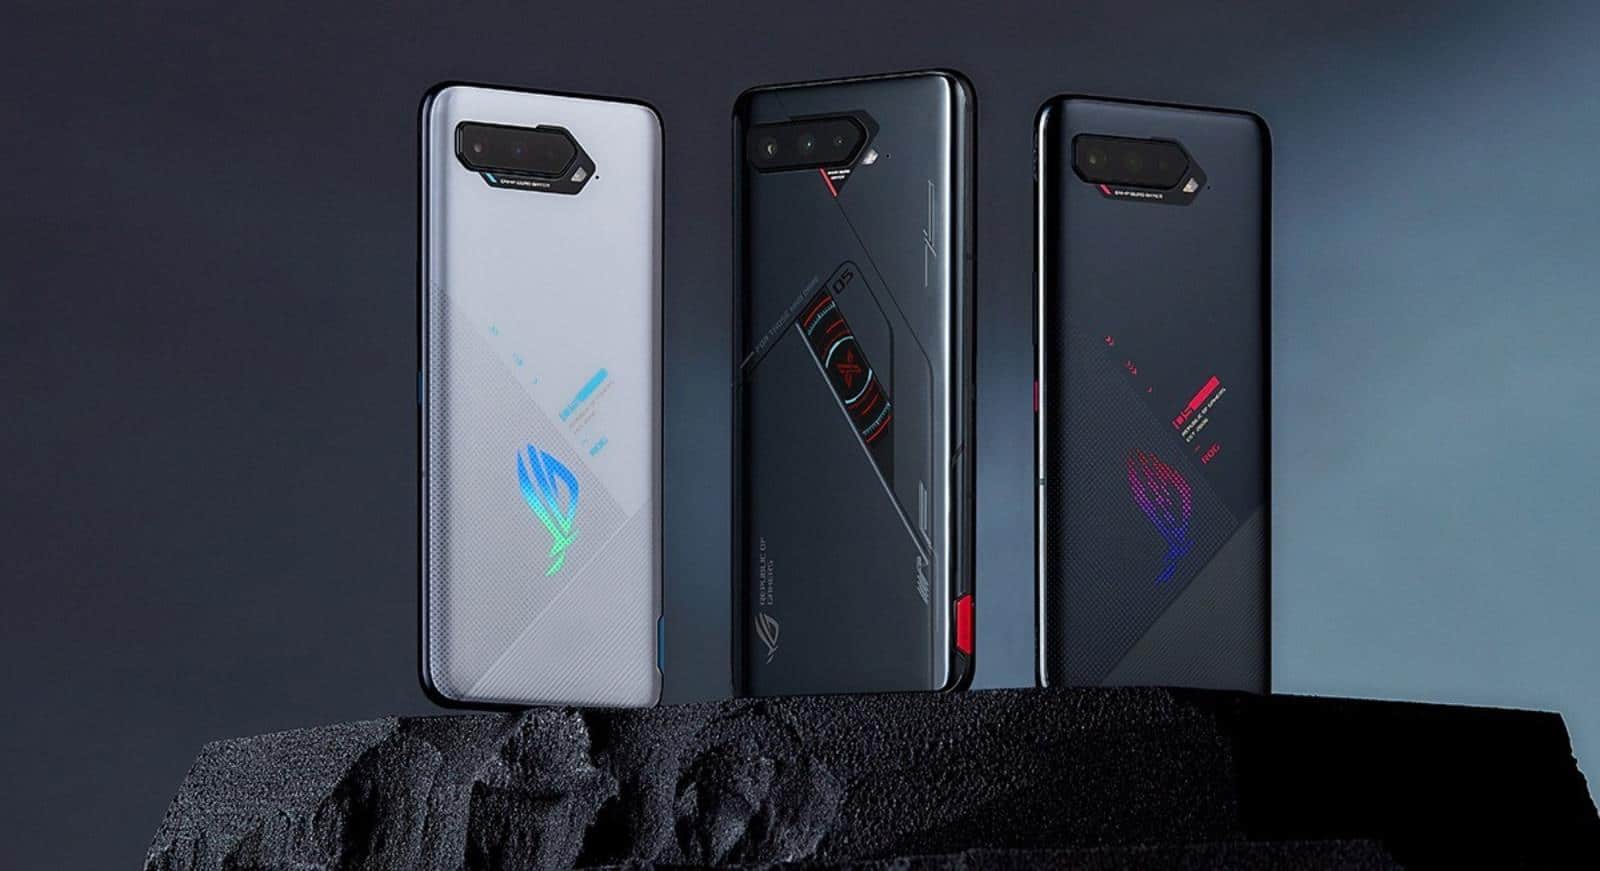 Asus ROG Phone 5s and ROG Phone 5s Pro gaming smartphones are entering Poland